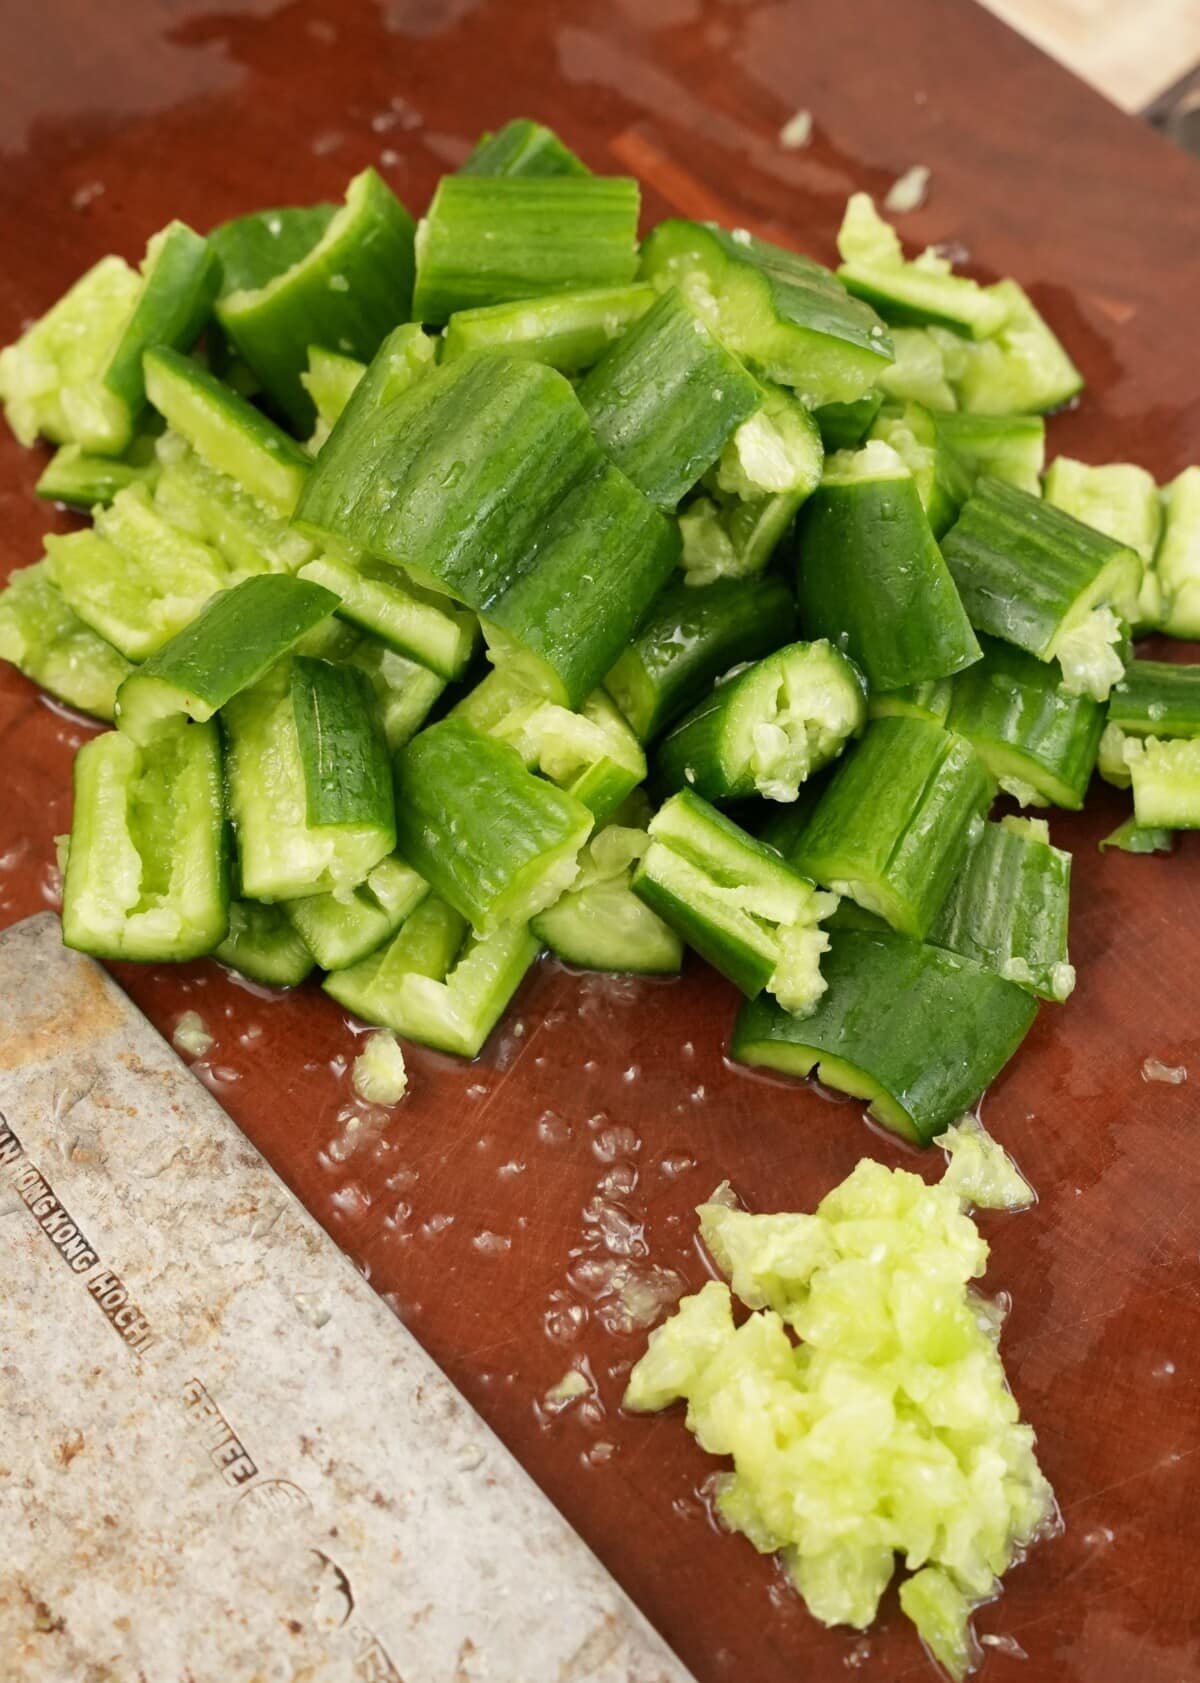 Cucumbers smashed on a cutting board.